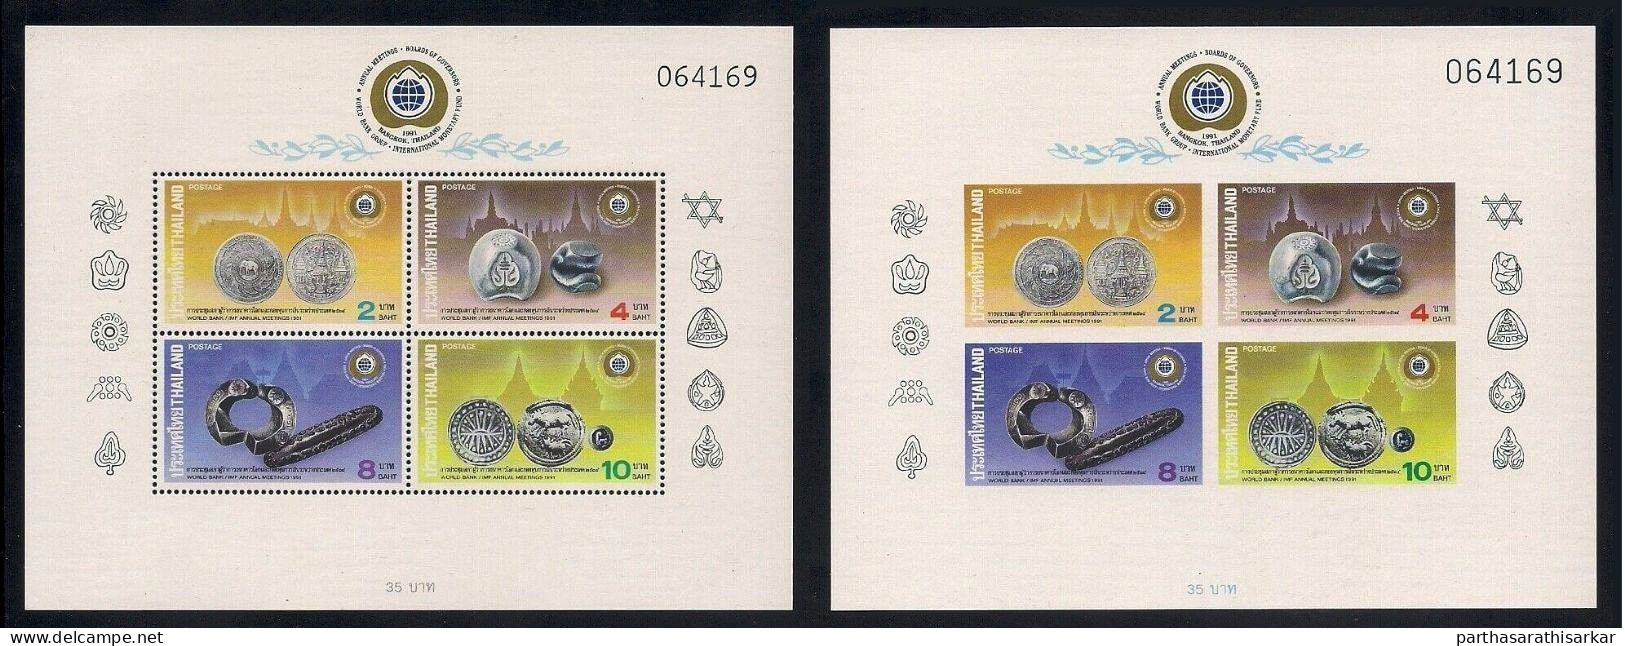 THAILAND 1991 ANCIENT COINAGE COINS PERF IMPERF SAME NO MINIATURE SHEET MS SET MNH - Münzen